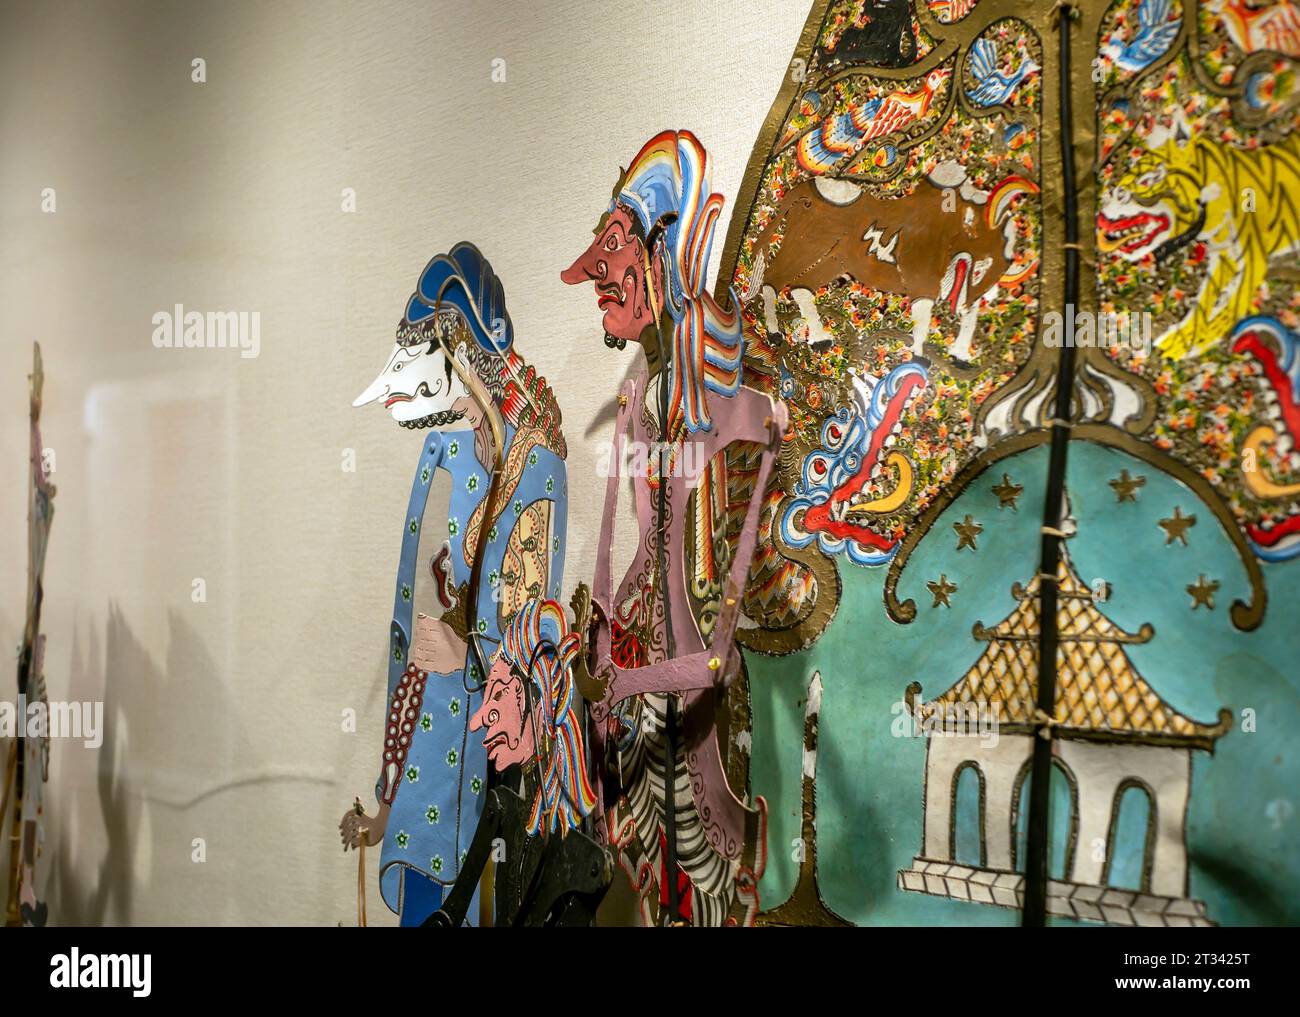 Wayang kulit, shadow puppets,  a traditional javanese art, from Java, Indonesia. Stock Photo